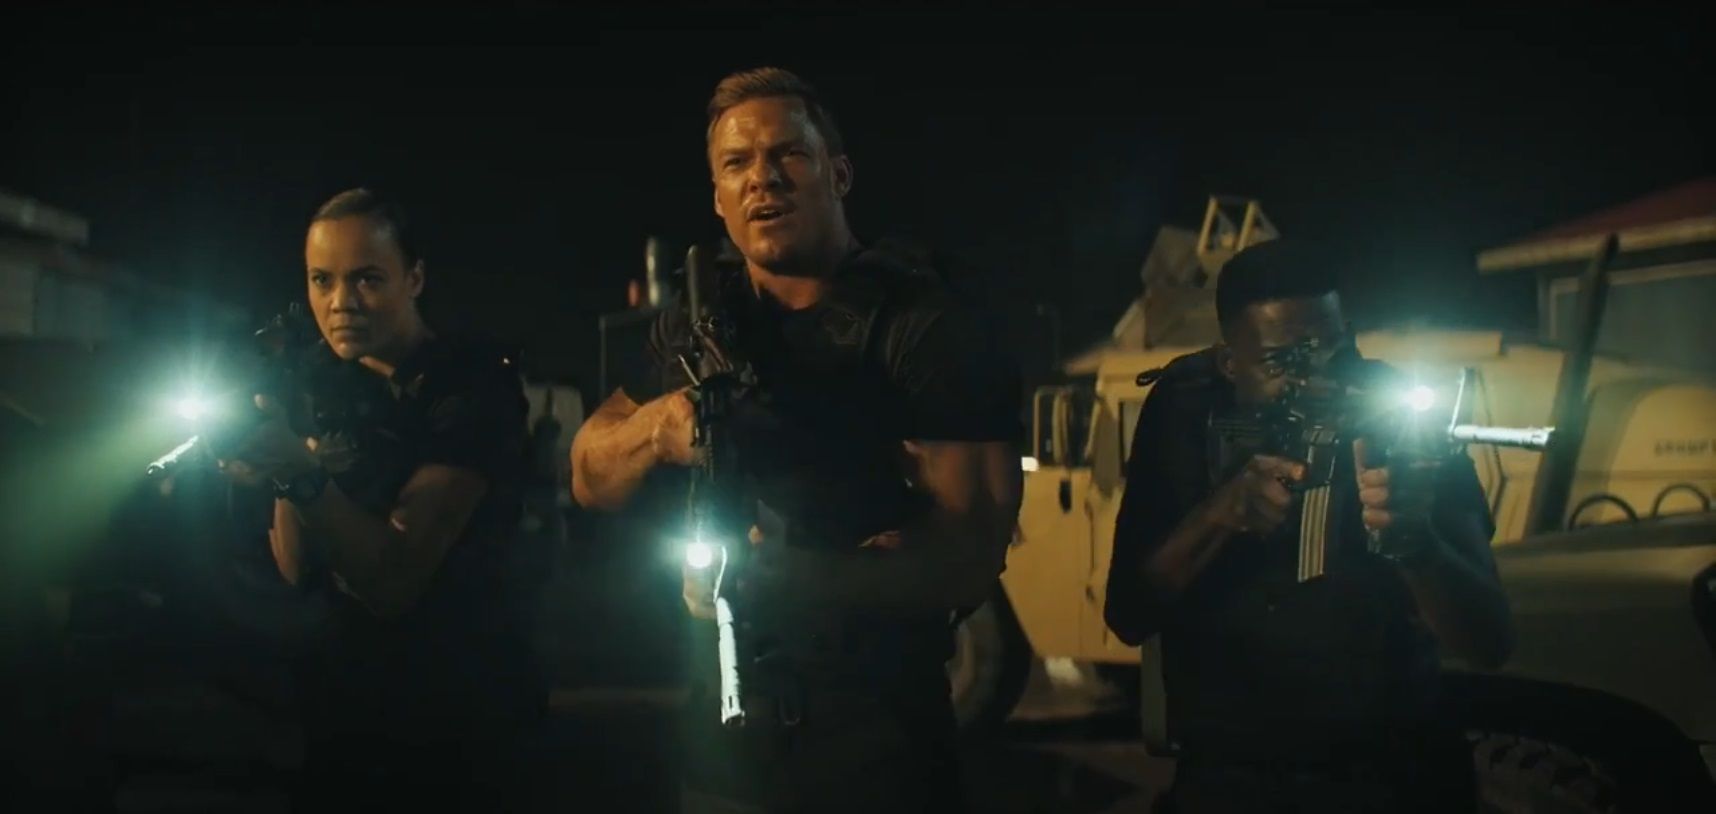 Frances Neagley, Jack Reacher and Stan Lowrey dressed in black aiming rifles with flashlights in the motor pool in Season 2